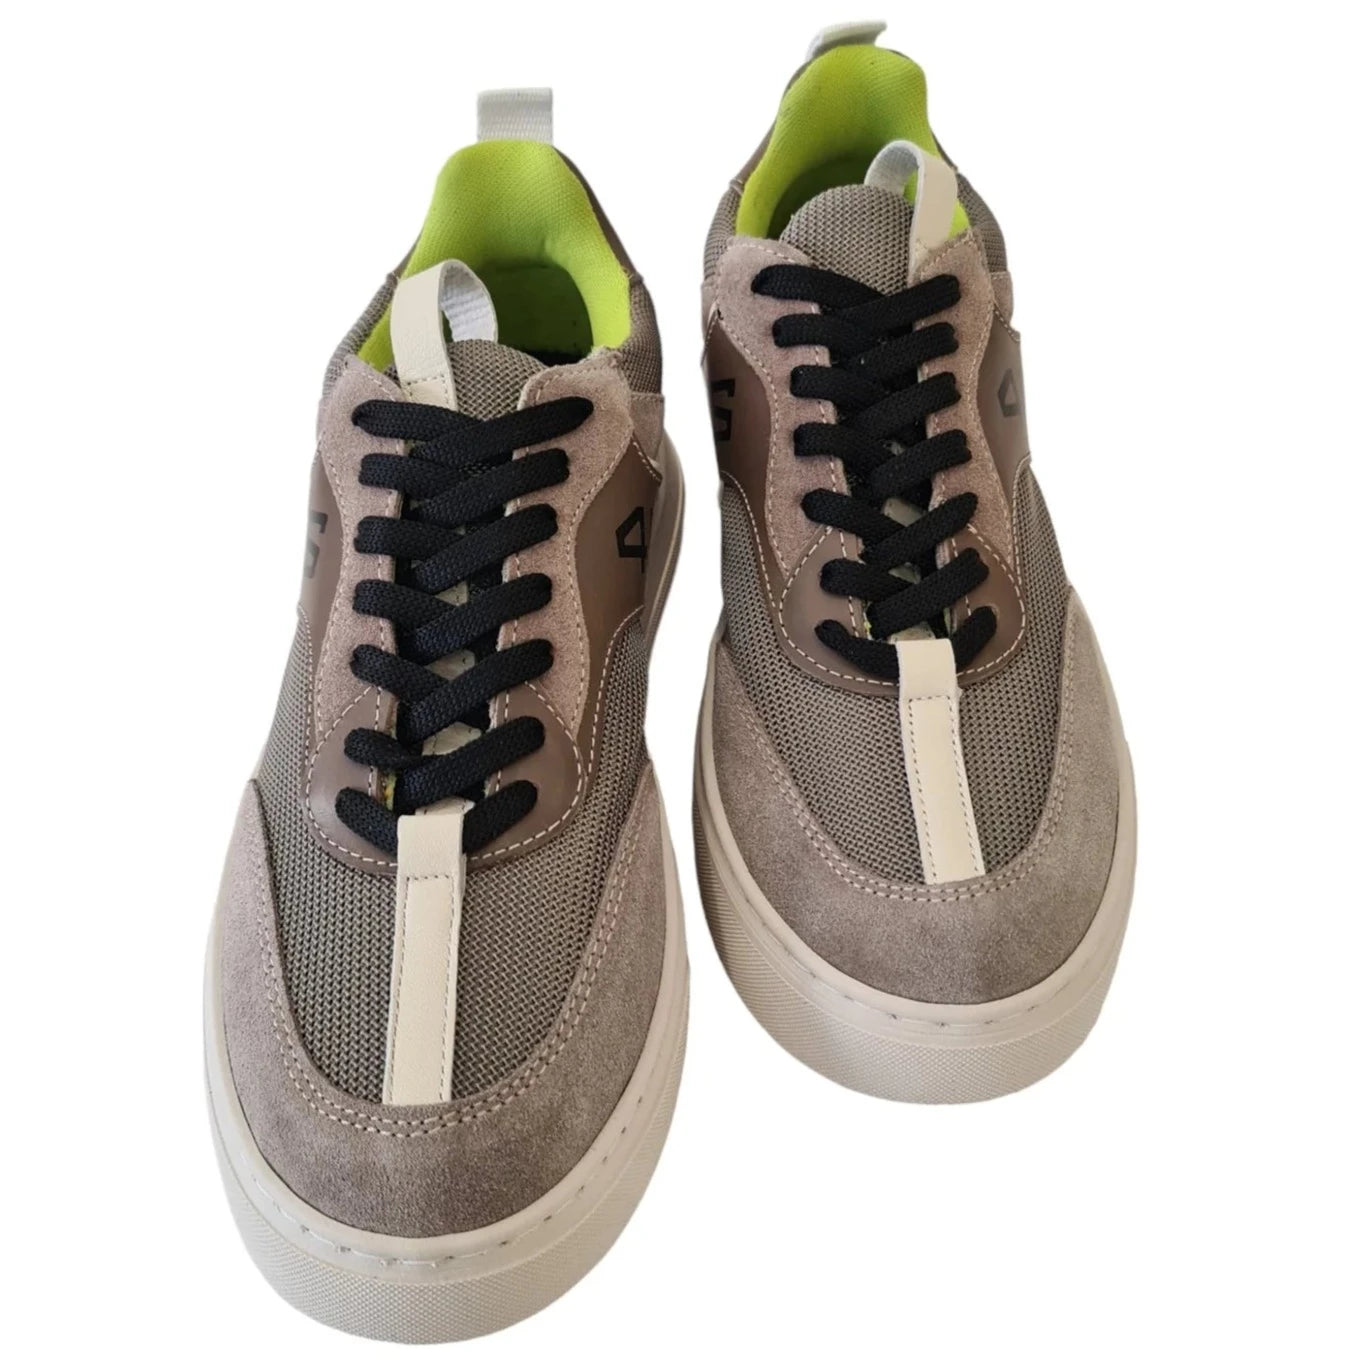 Sneakers Cesare Paciotti 4us man taupe leather and fabric